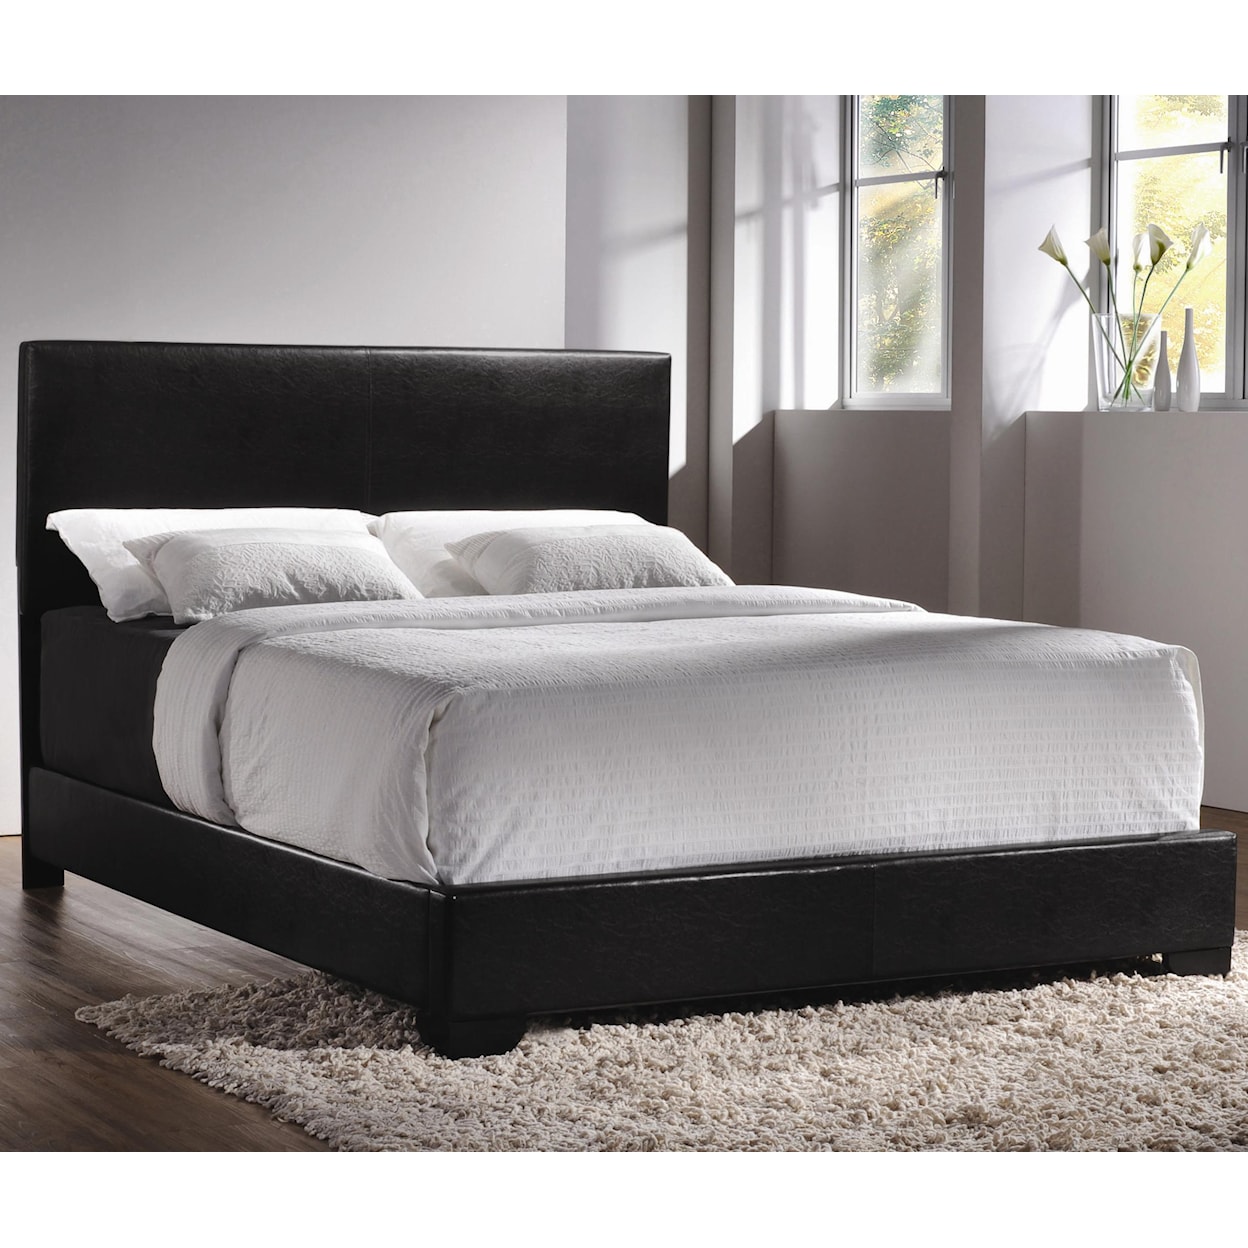 Coaster Upholstered Beds California King Upholstered Low-Profile Bed